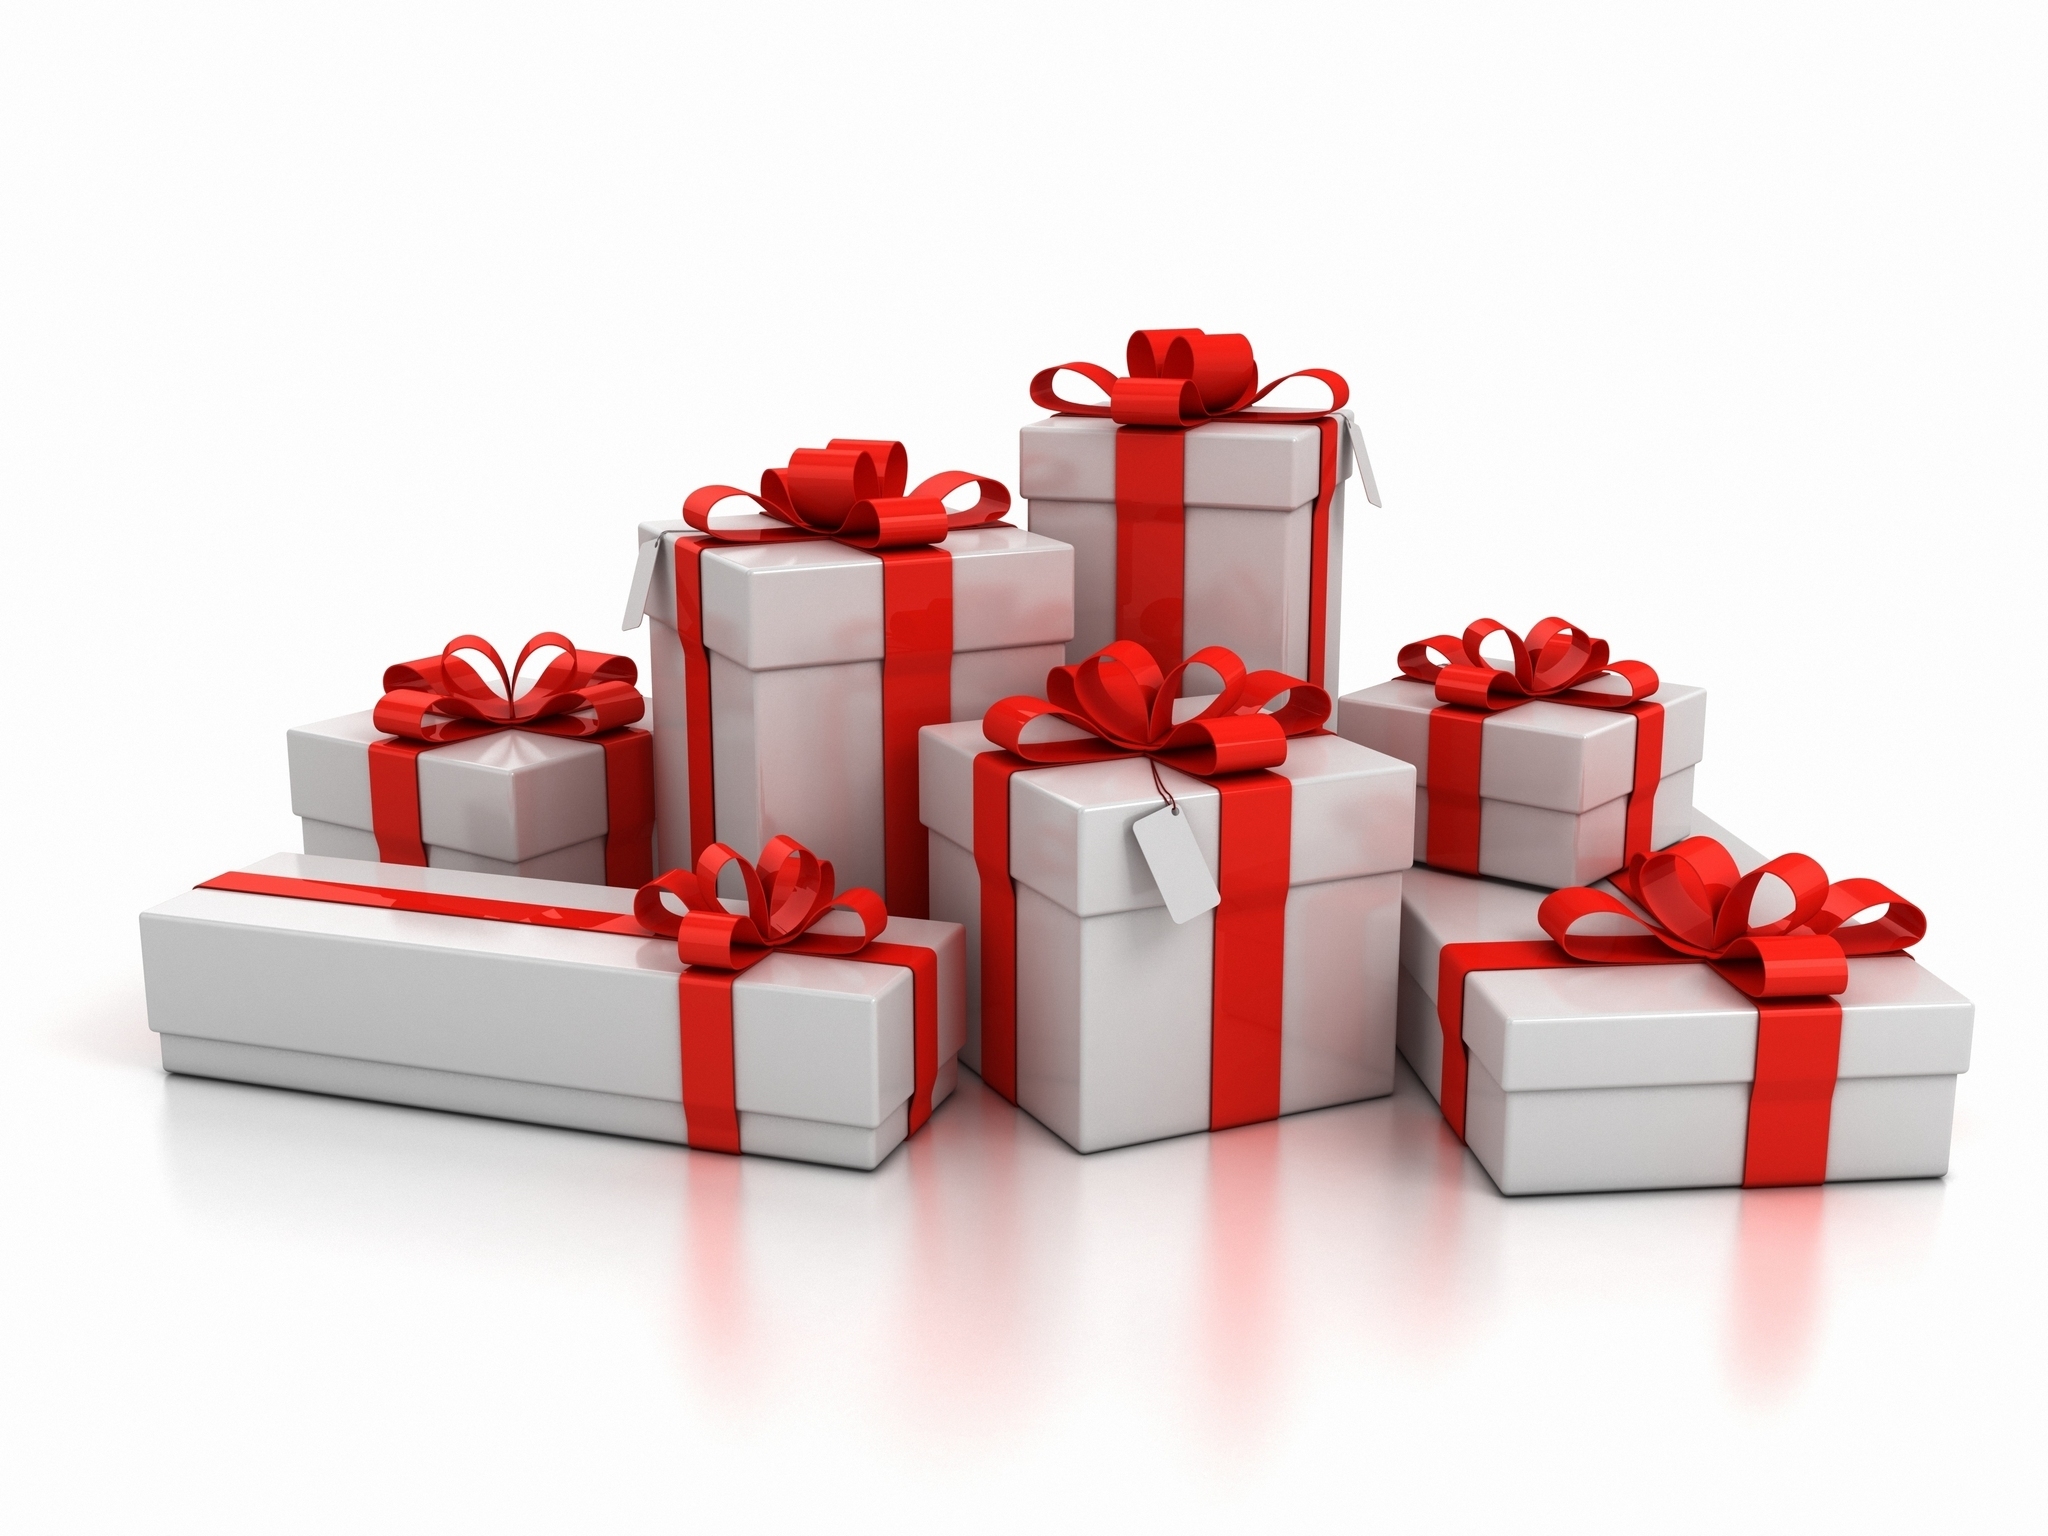 Gifts Image HD Wallpaper And Background Photos